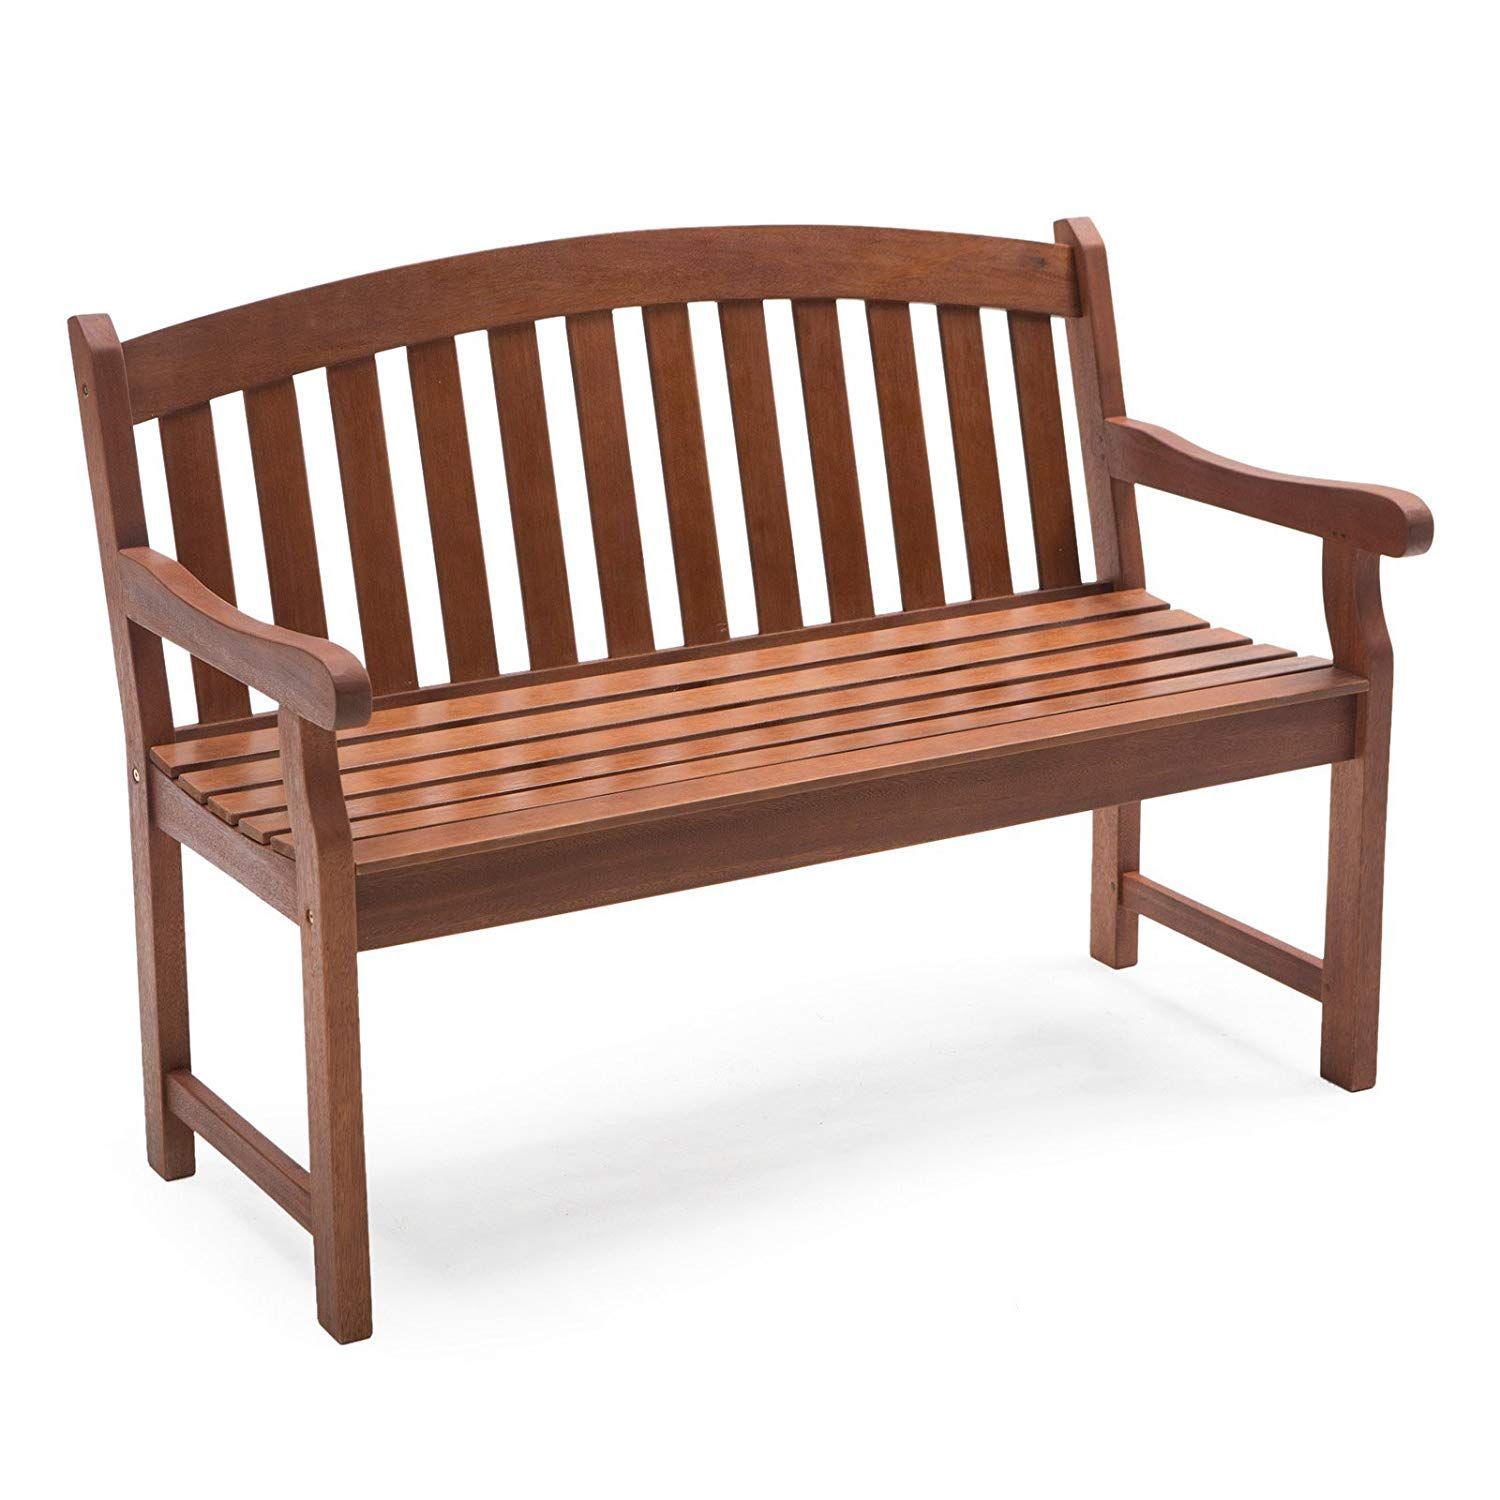 Relax Your Green Thumb And Take In Your Hardwork From The Pertaining To Harpersfield Wooden Garden Benches (View 6 of 25)